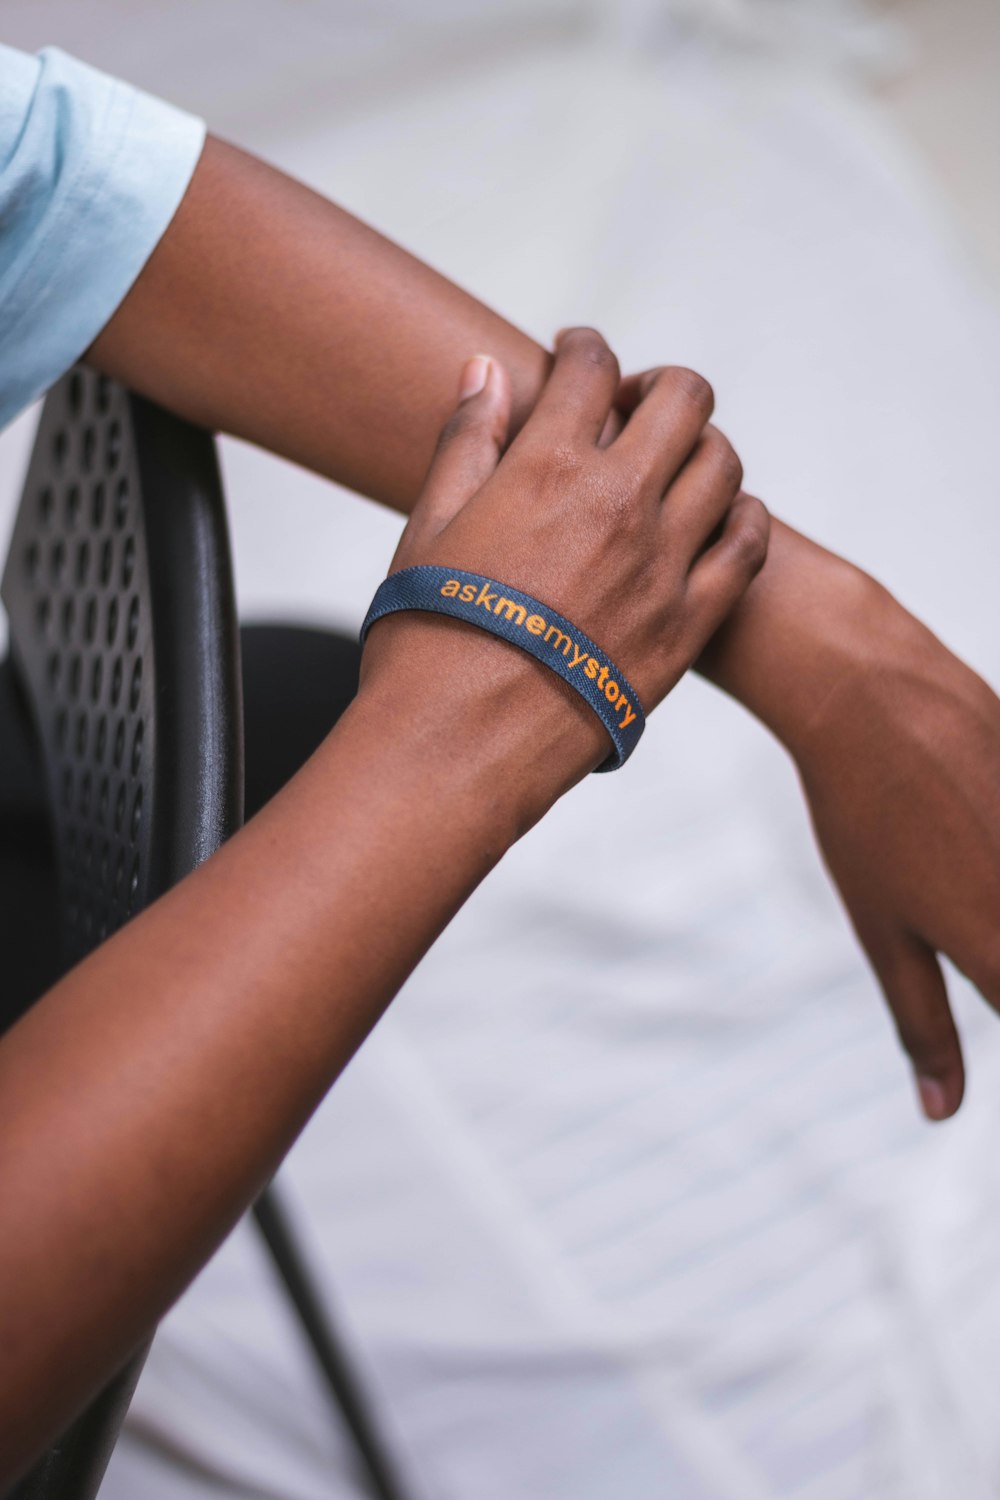 a person wearing a bracelet with a name on it